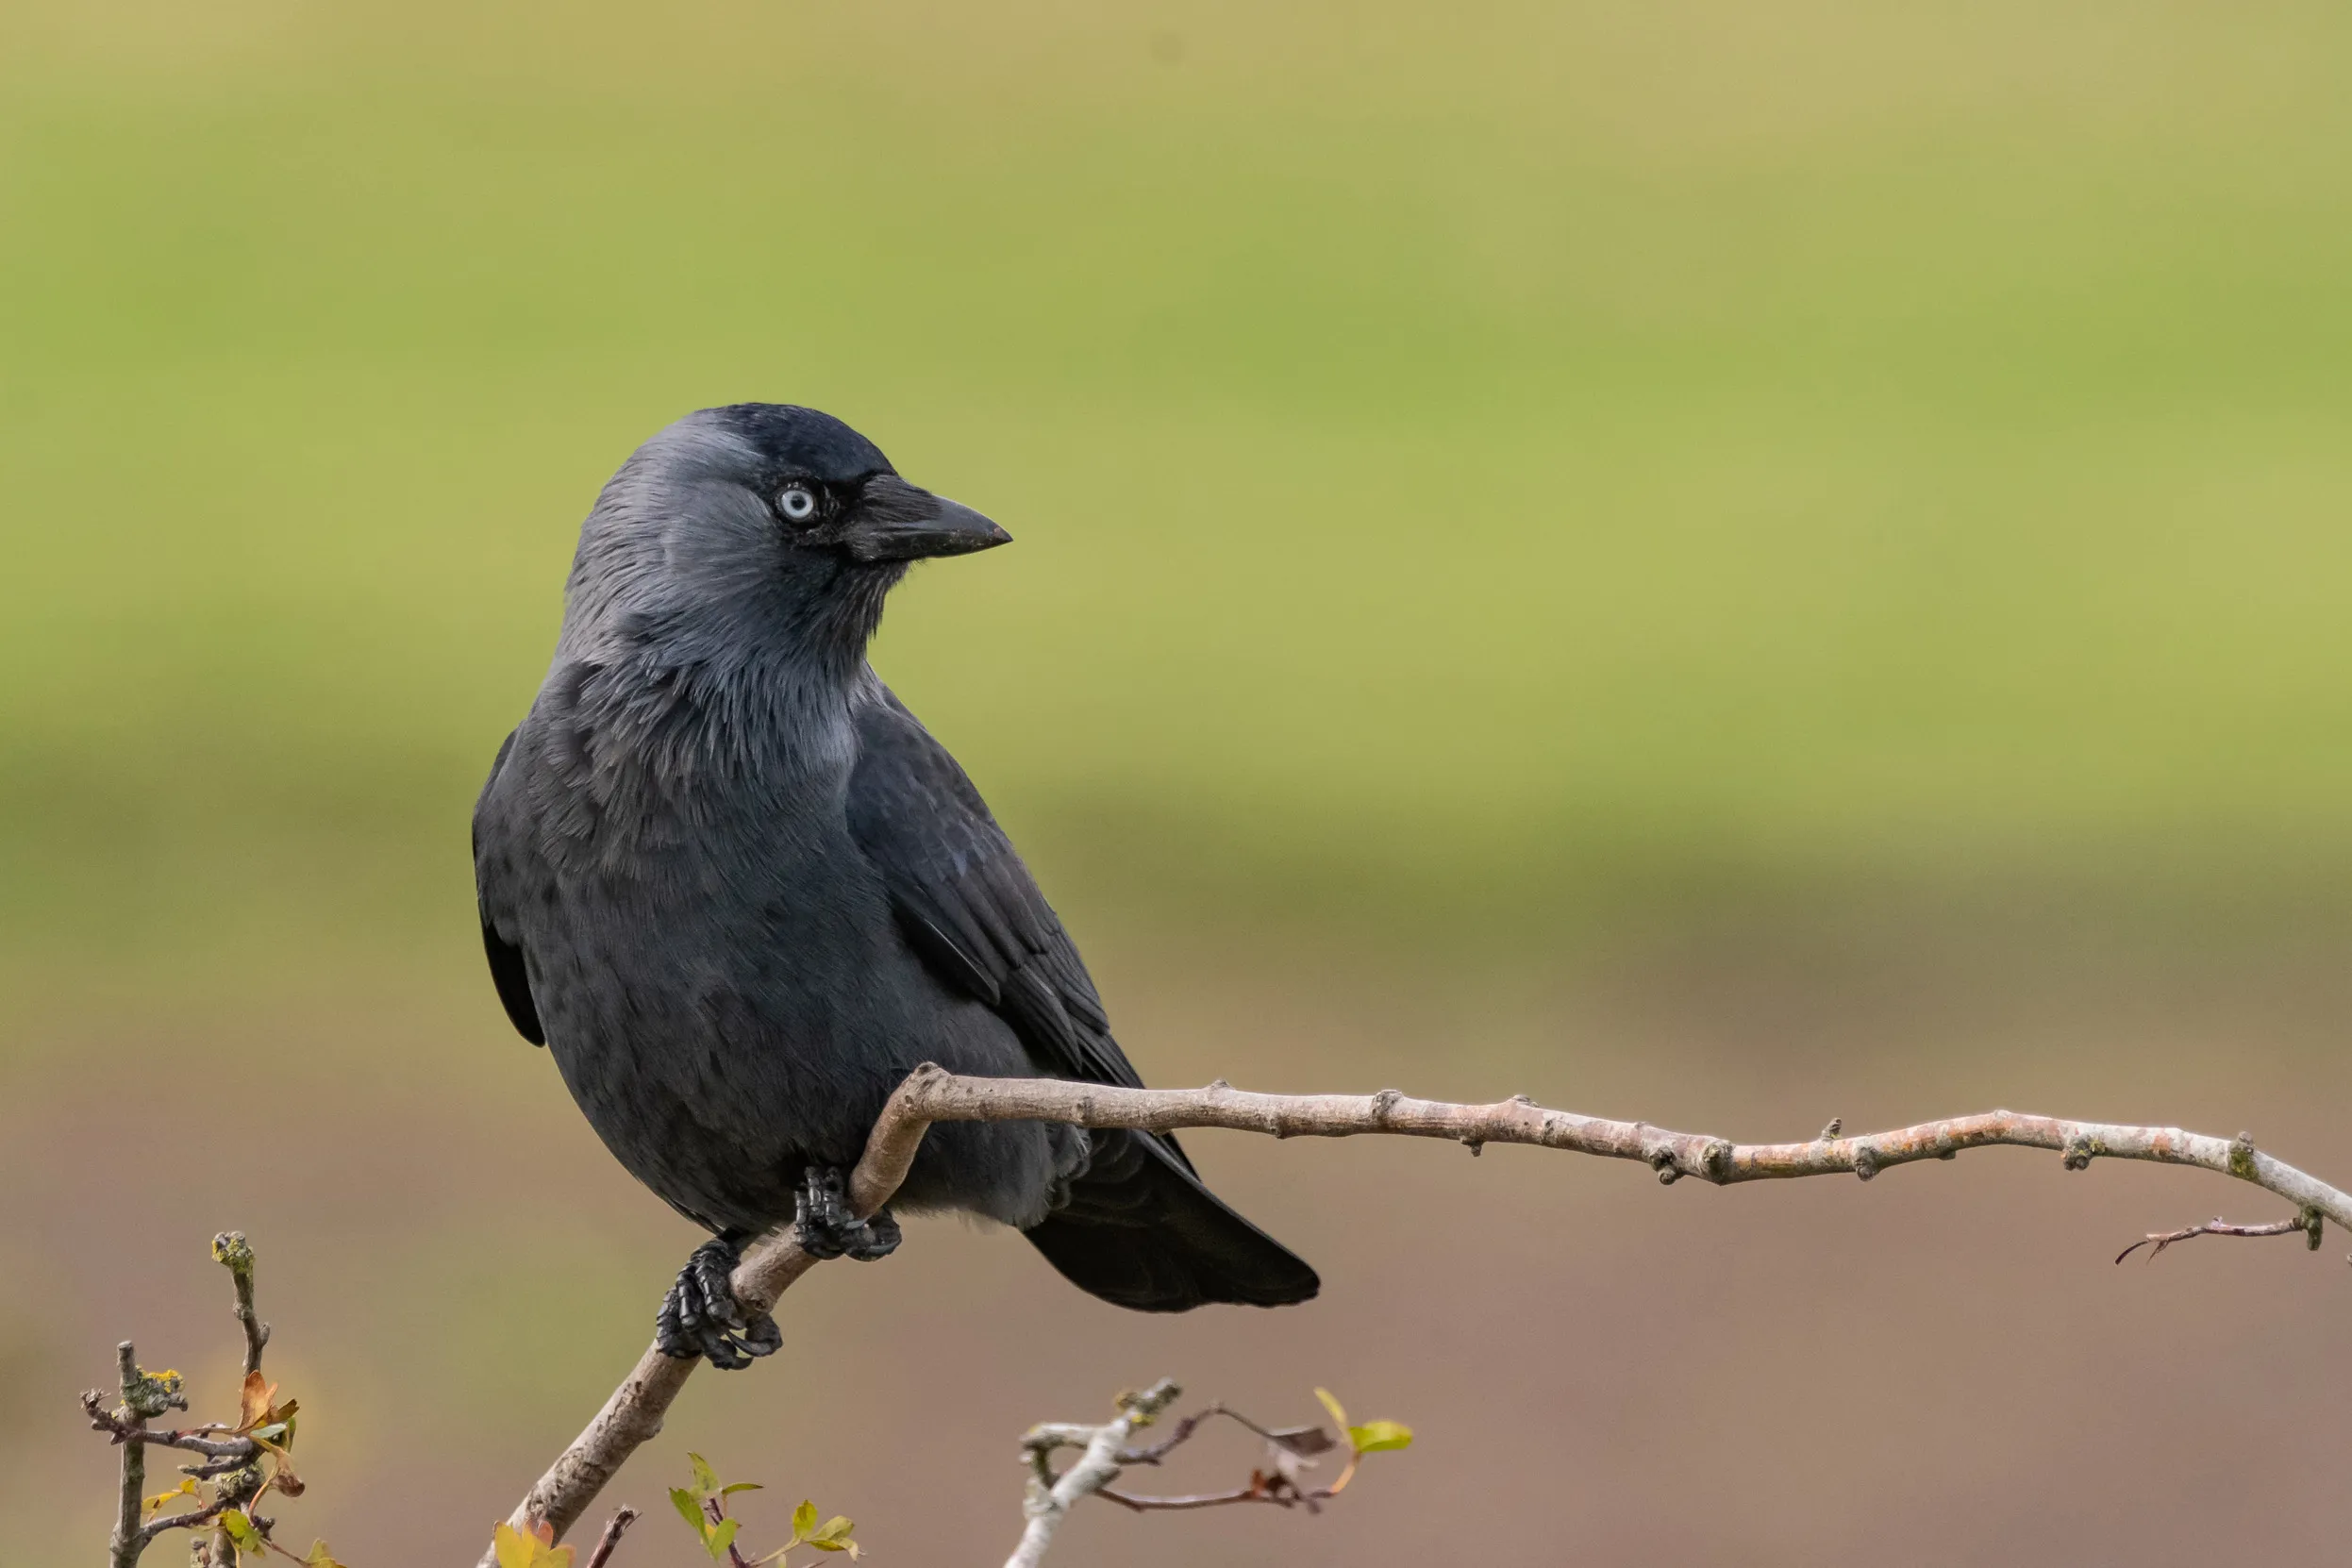 Jackdaw perched on a branch looking off to the side.